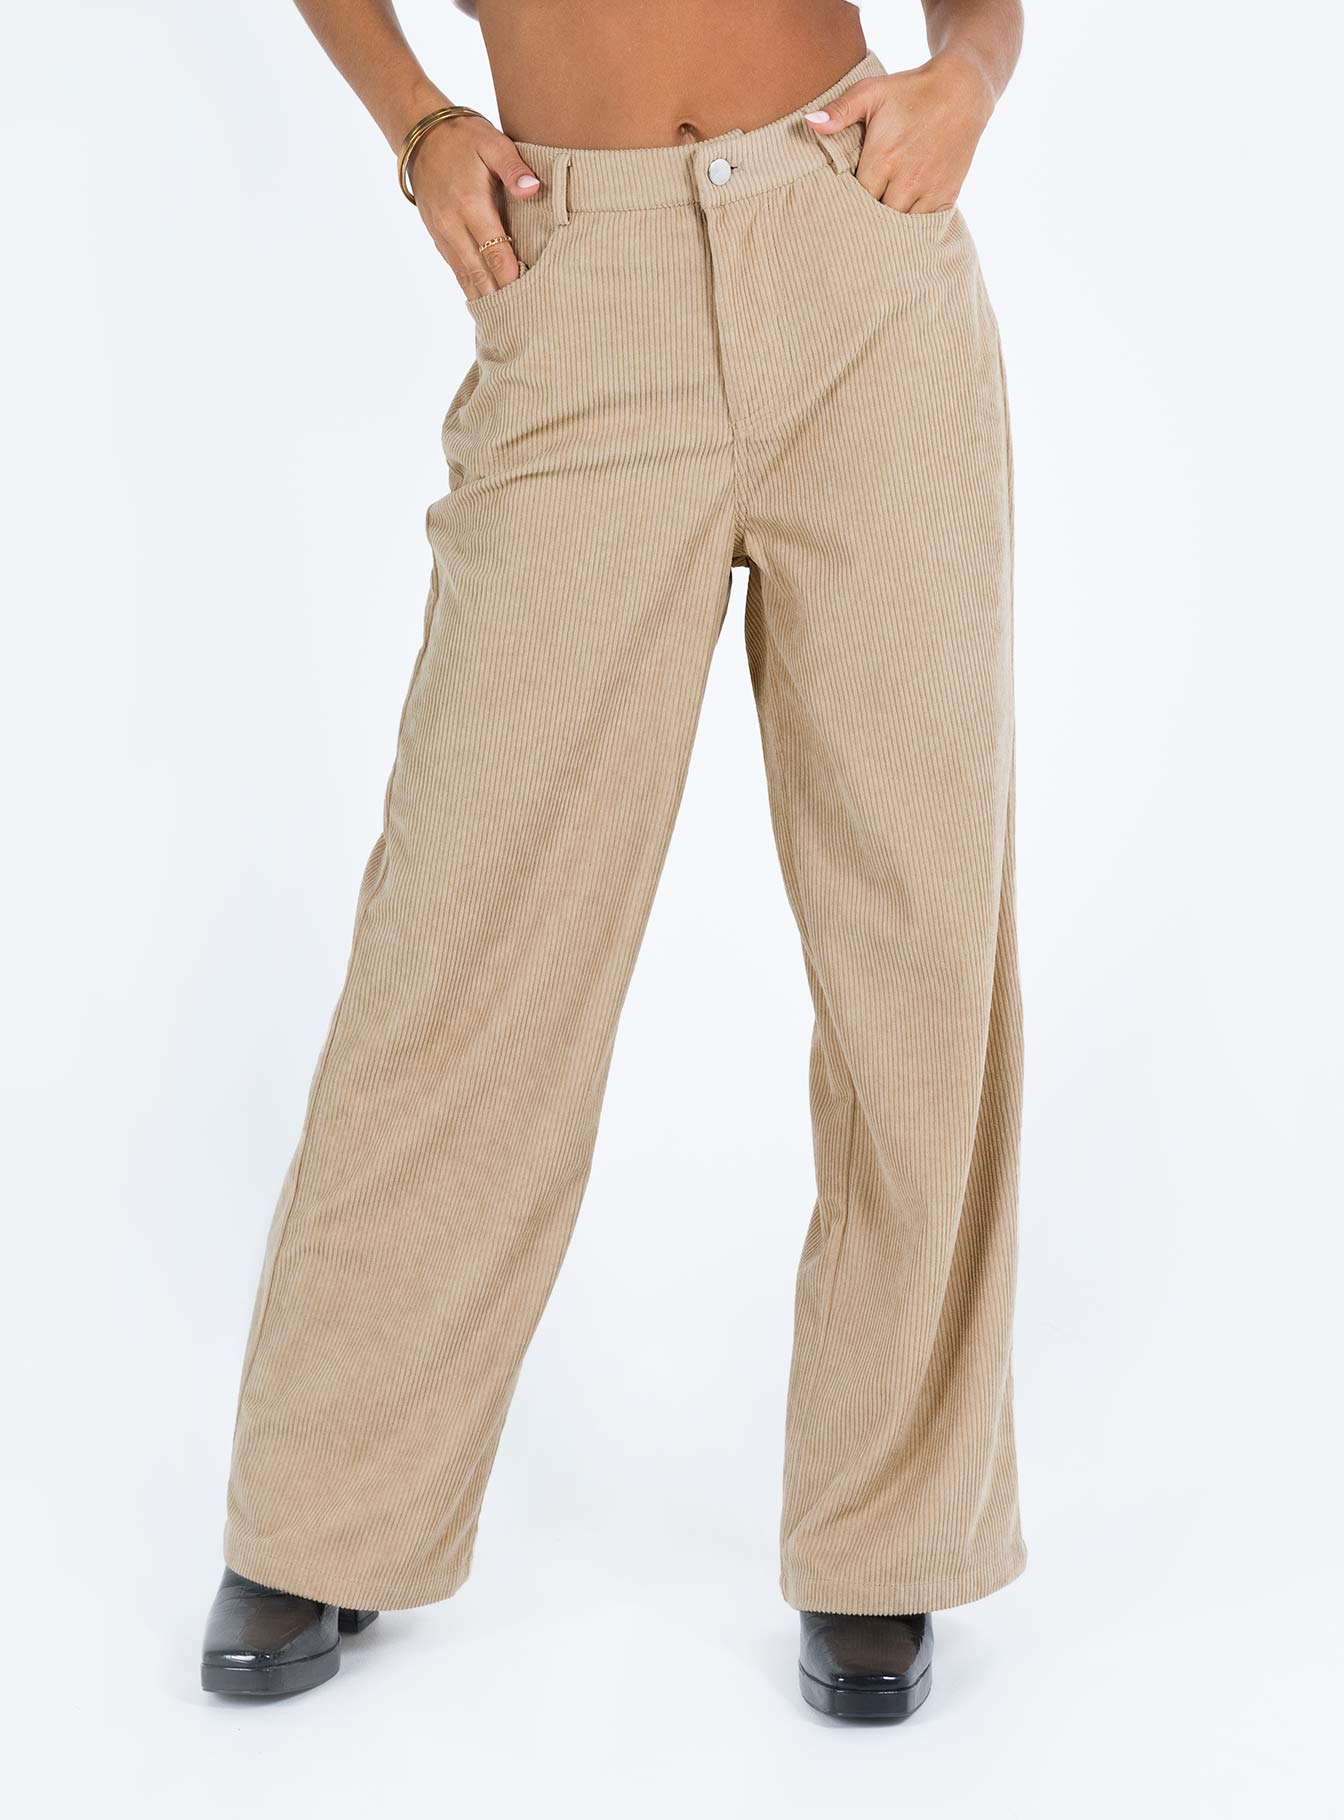 Buy Beige Trousers  Pants for Girls by Outryt Online  Ajiocom